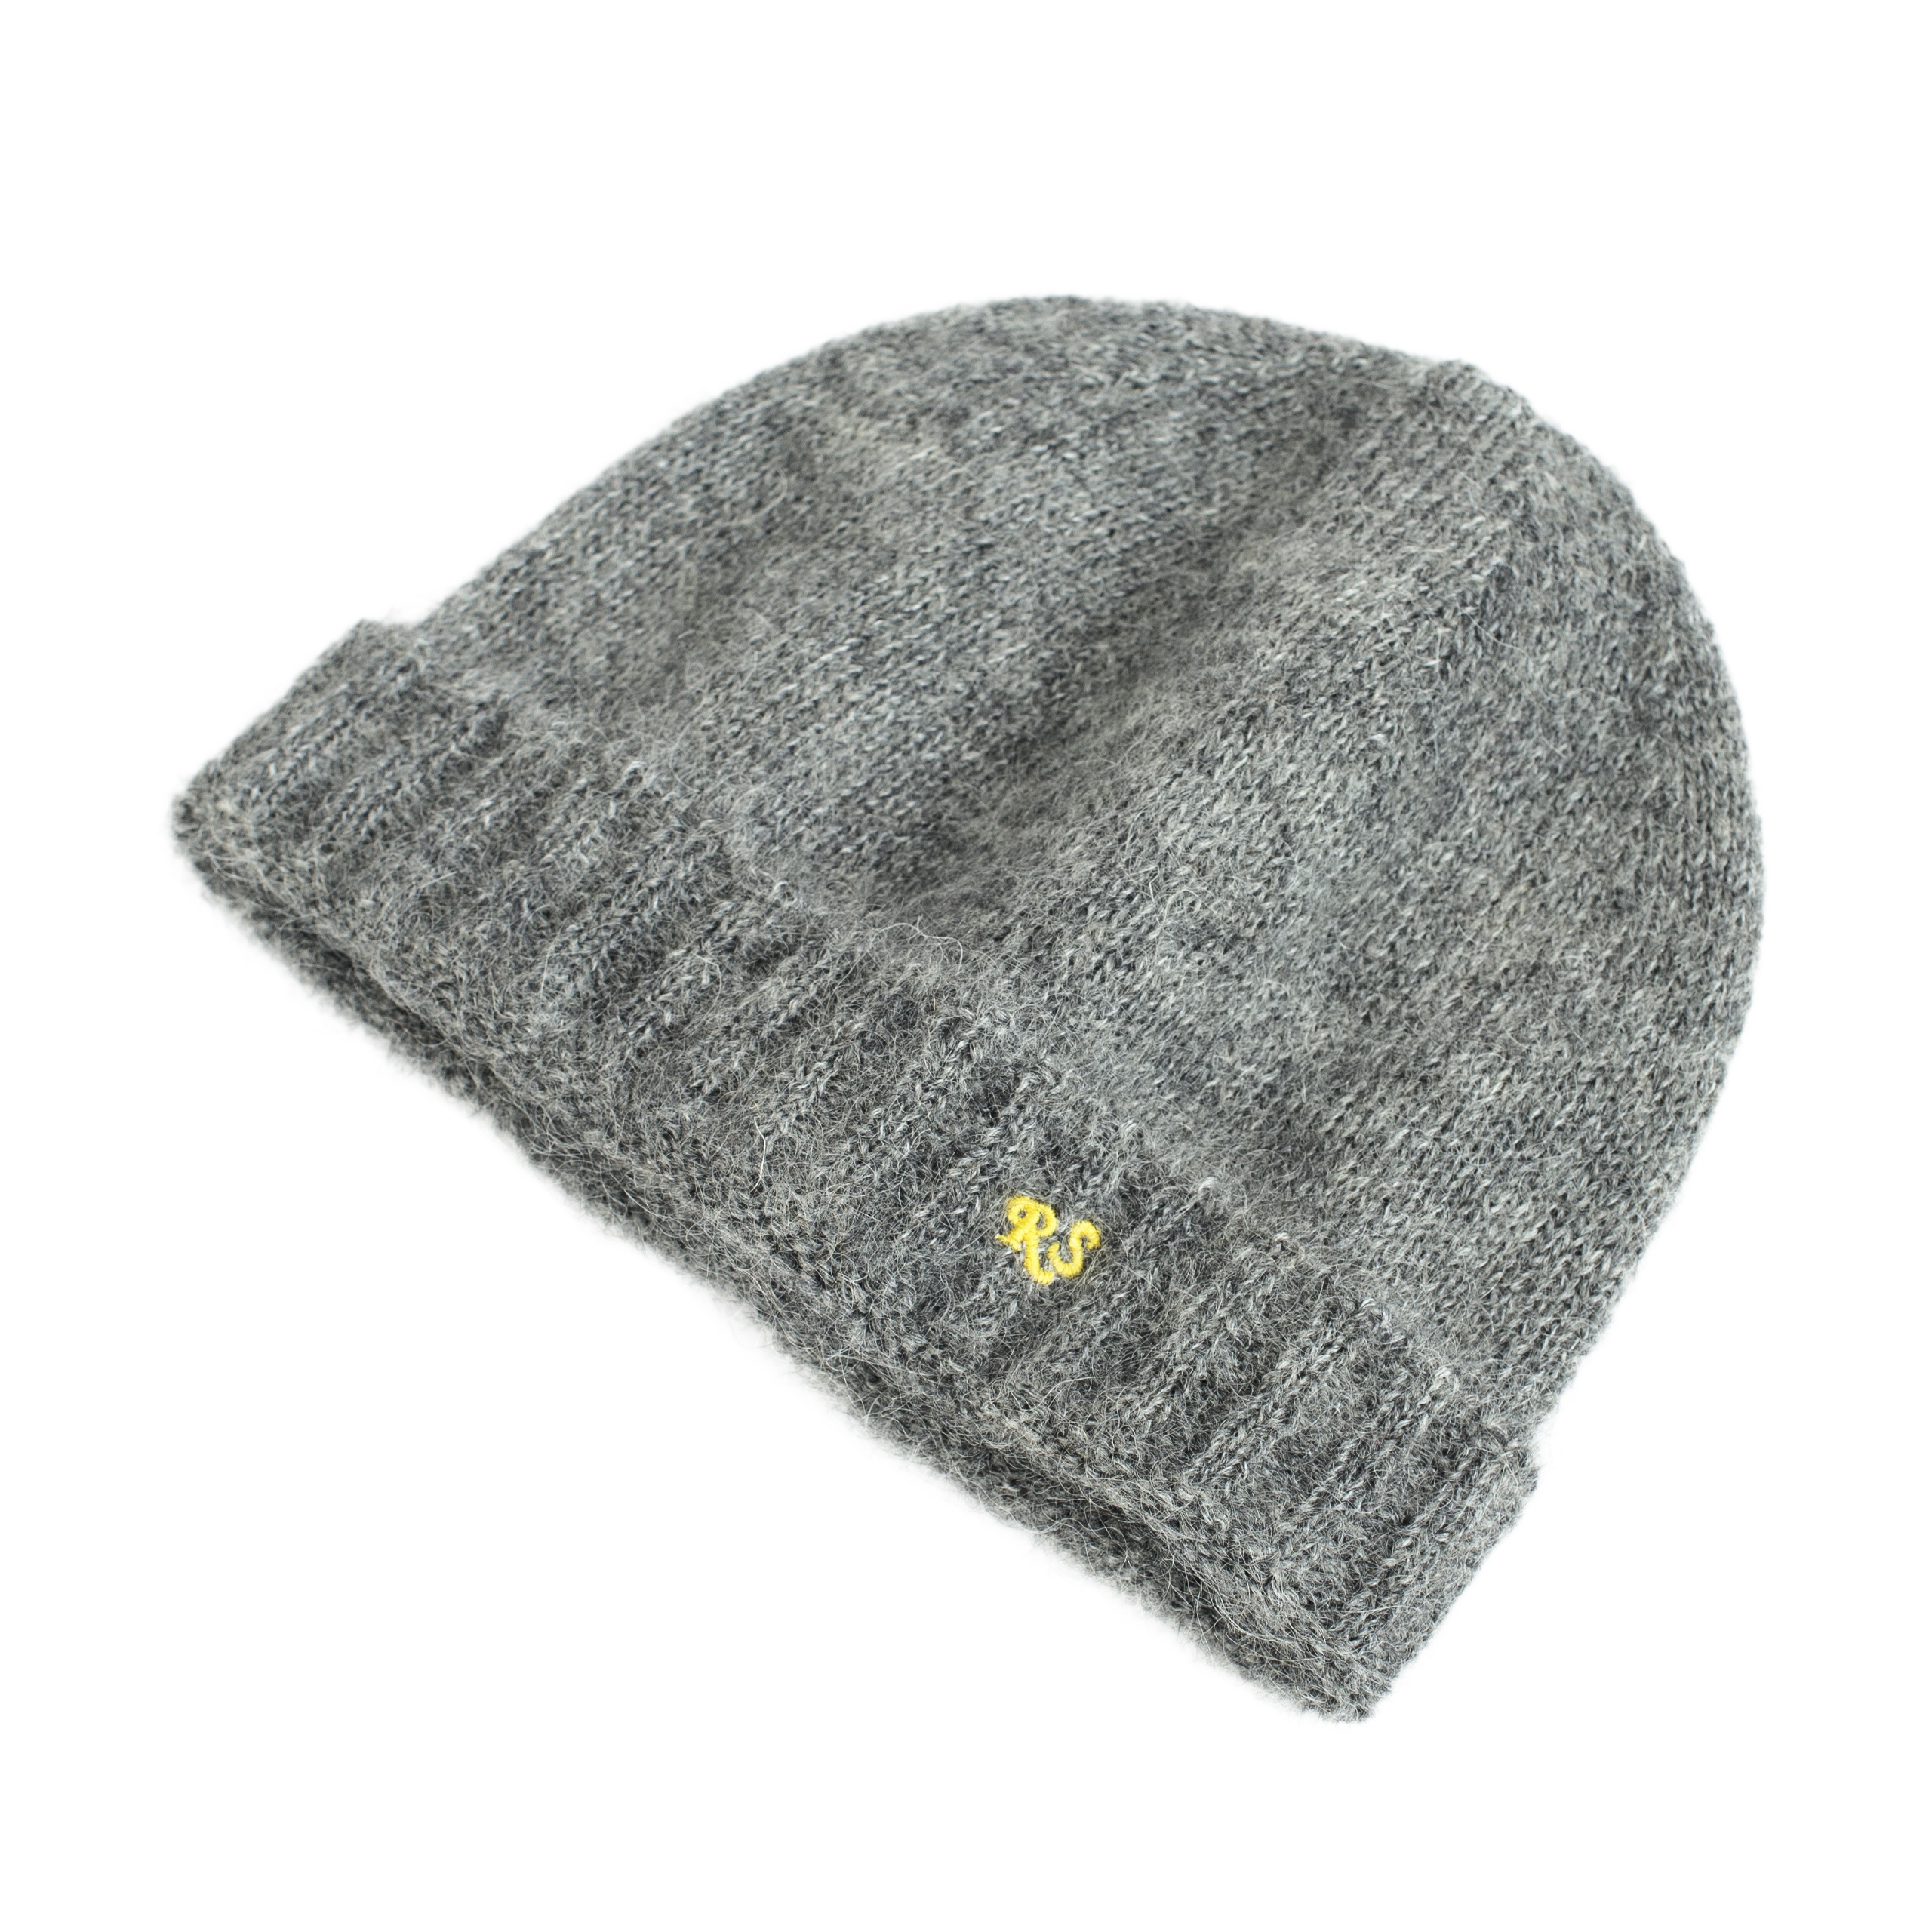 RS KNITTED BEANIE IN GREY - 4